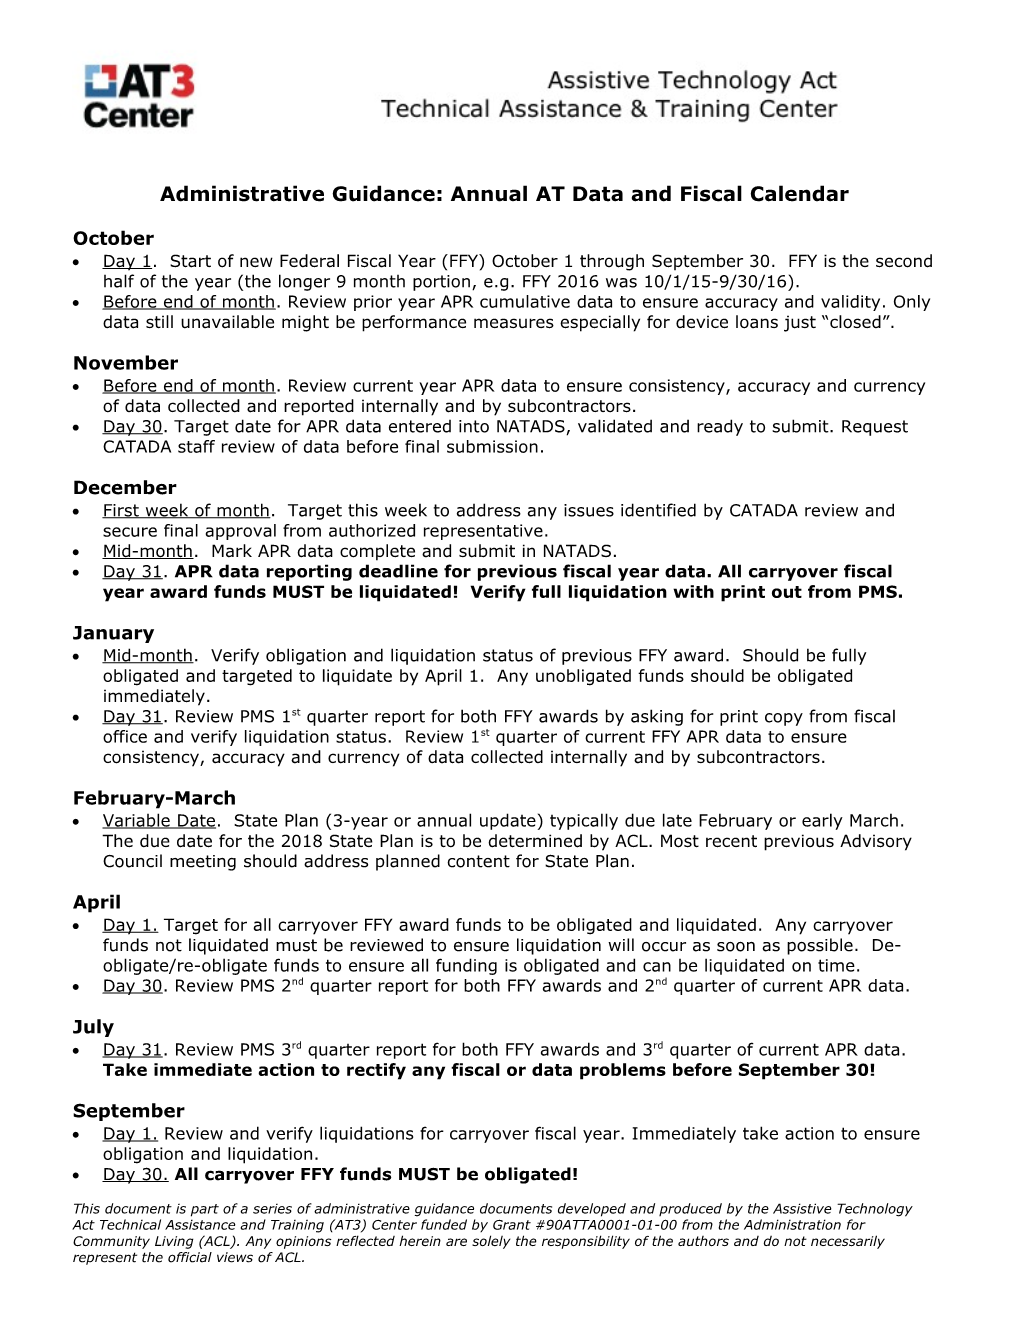 Administrative Guidance: Annual at Data and Fiscal Calendar